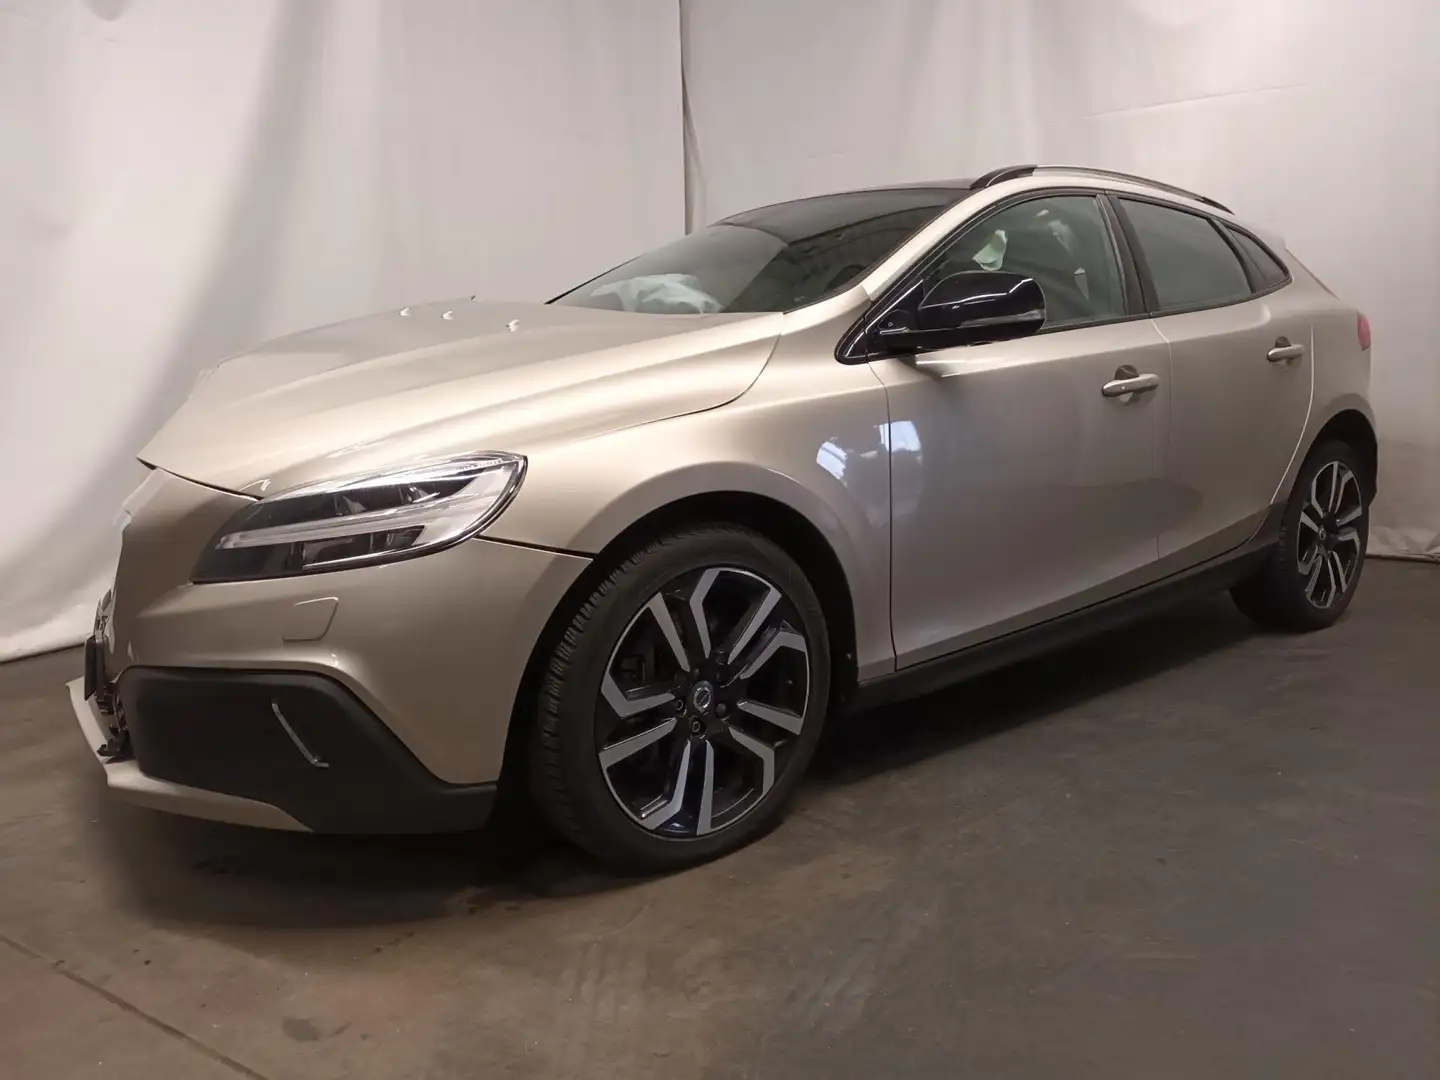 Volvo V40 Cross Country 1.5 T3 Nordic+ - Front Schade - Airbags Defect Marrone - 2